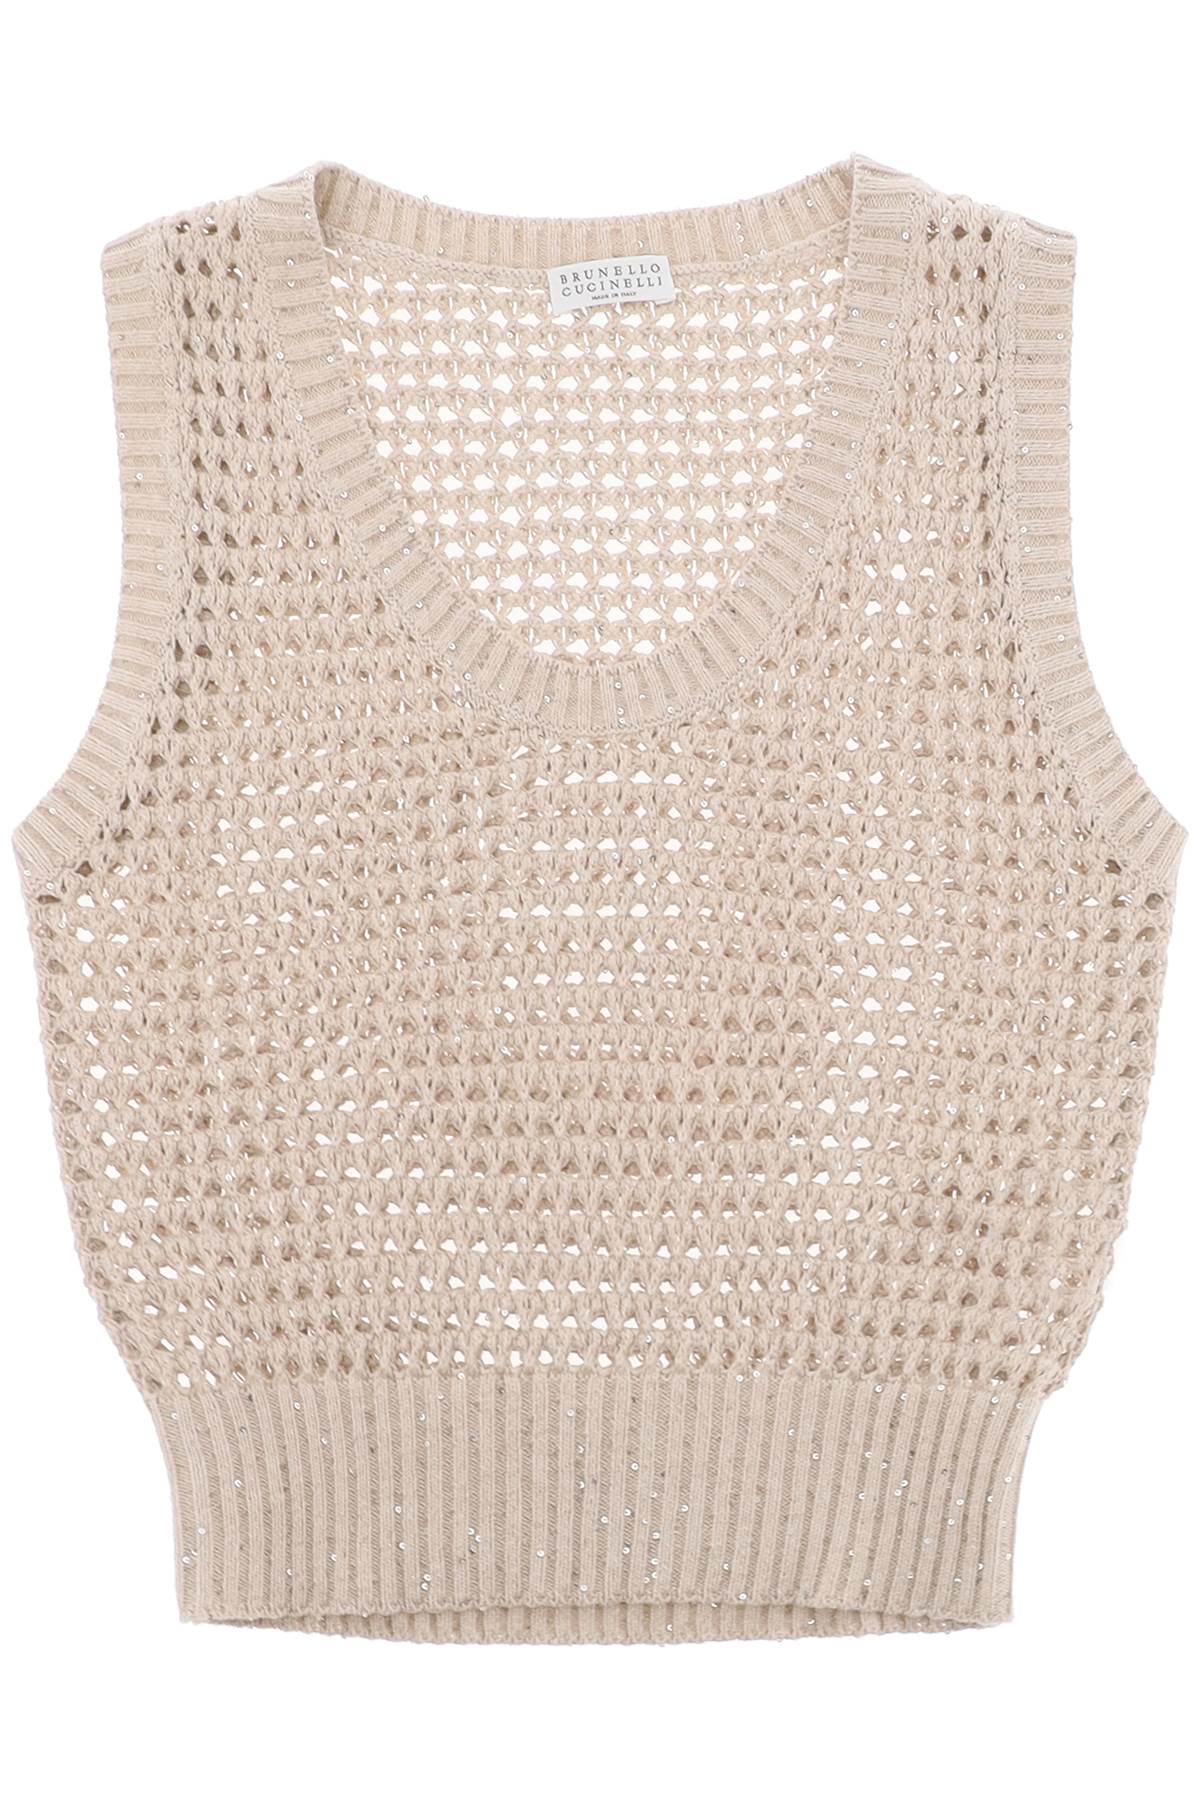 Brunello cucinelli knit top with sparkling details-0